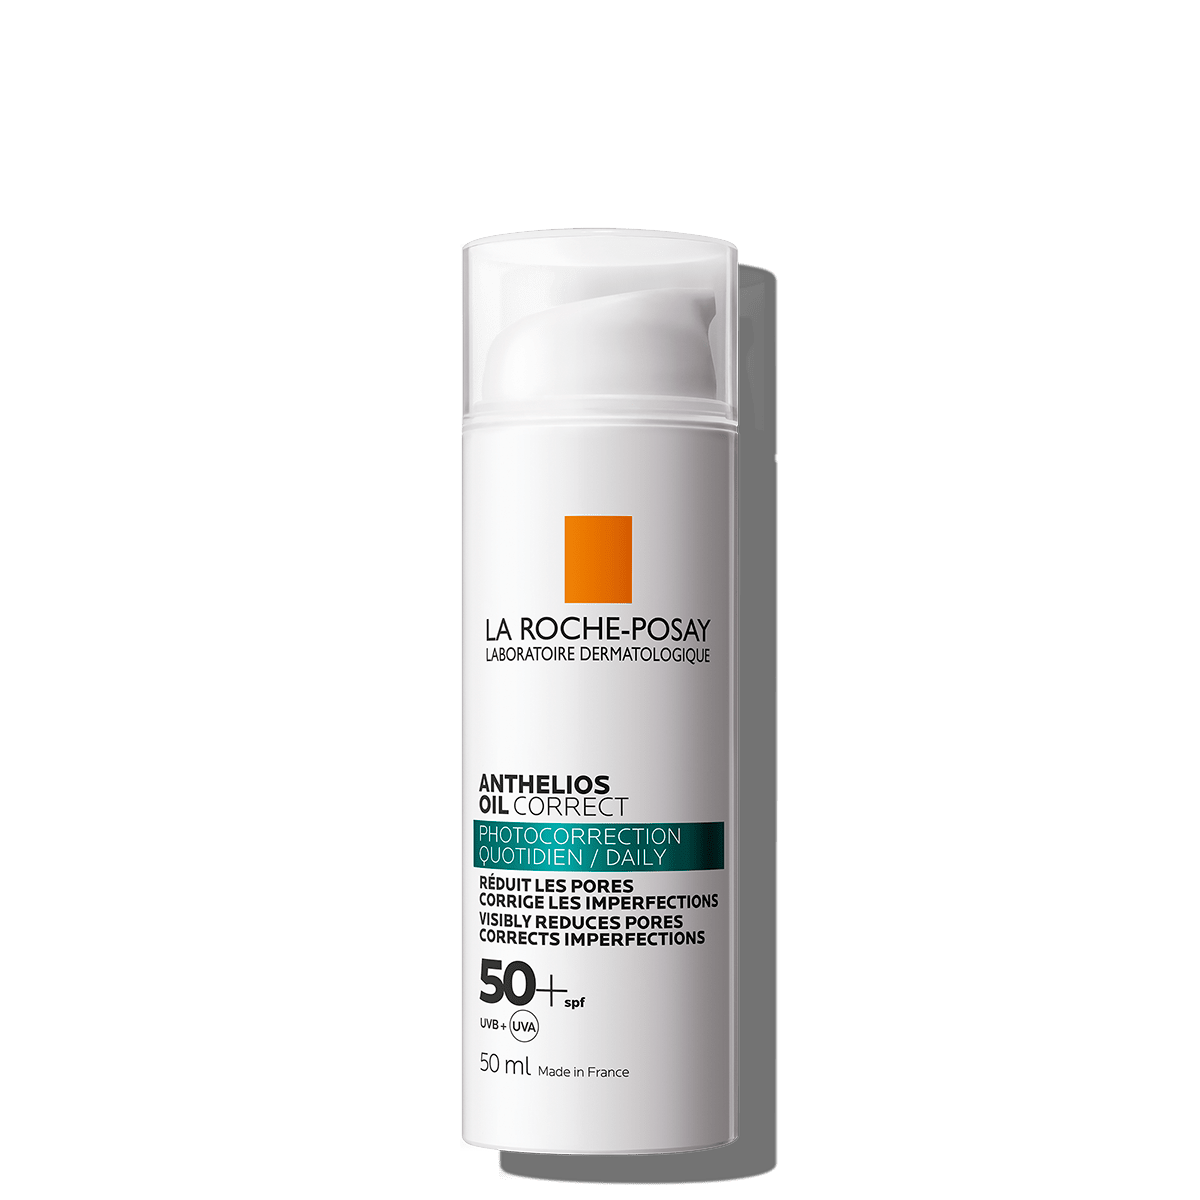 La Roche-Posay Anthelios Oil Correct SPF 50. An oil-based sunscreen with SPF 50 protection.